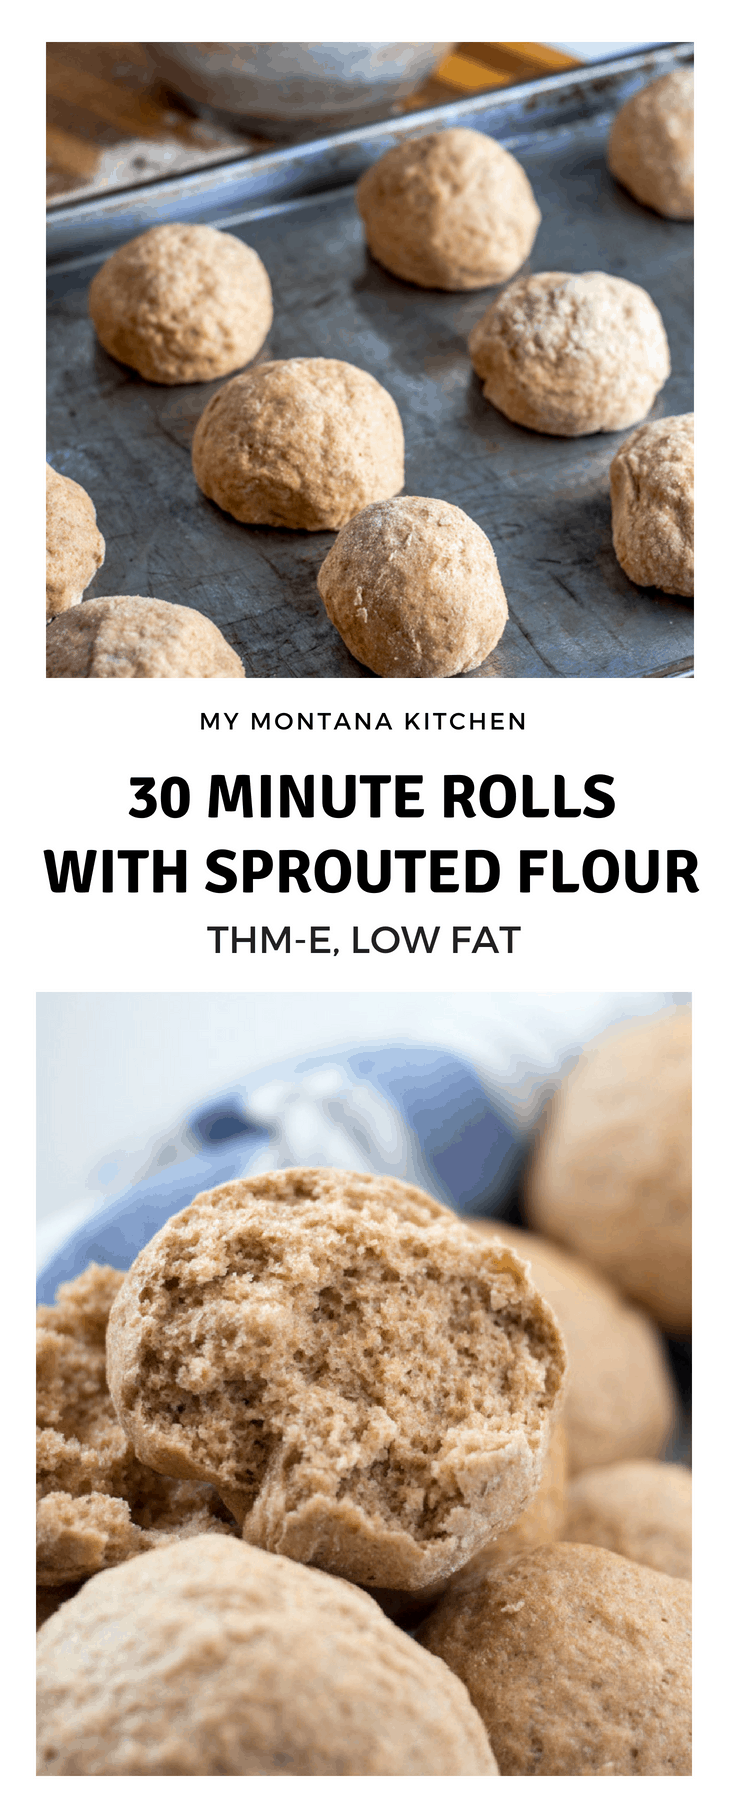 It only takes 30 minutes from start to finish to make these Sprouted Wheat 30 Minute Rolls. Healthy, filling, and they can be enjoyed as a Trim Healthy Mama E recipe. Quick, healthy, and sure to be a family-pleasing recipe! #trimhealthymama #thm #thm-e #lowfat #sproutedflour #30minuterolls #realfood #mymontanakitchen #thmbread